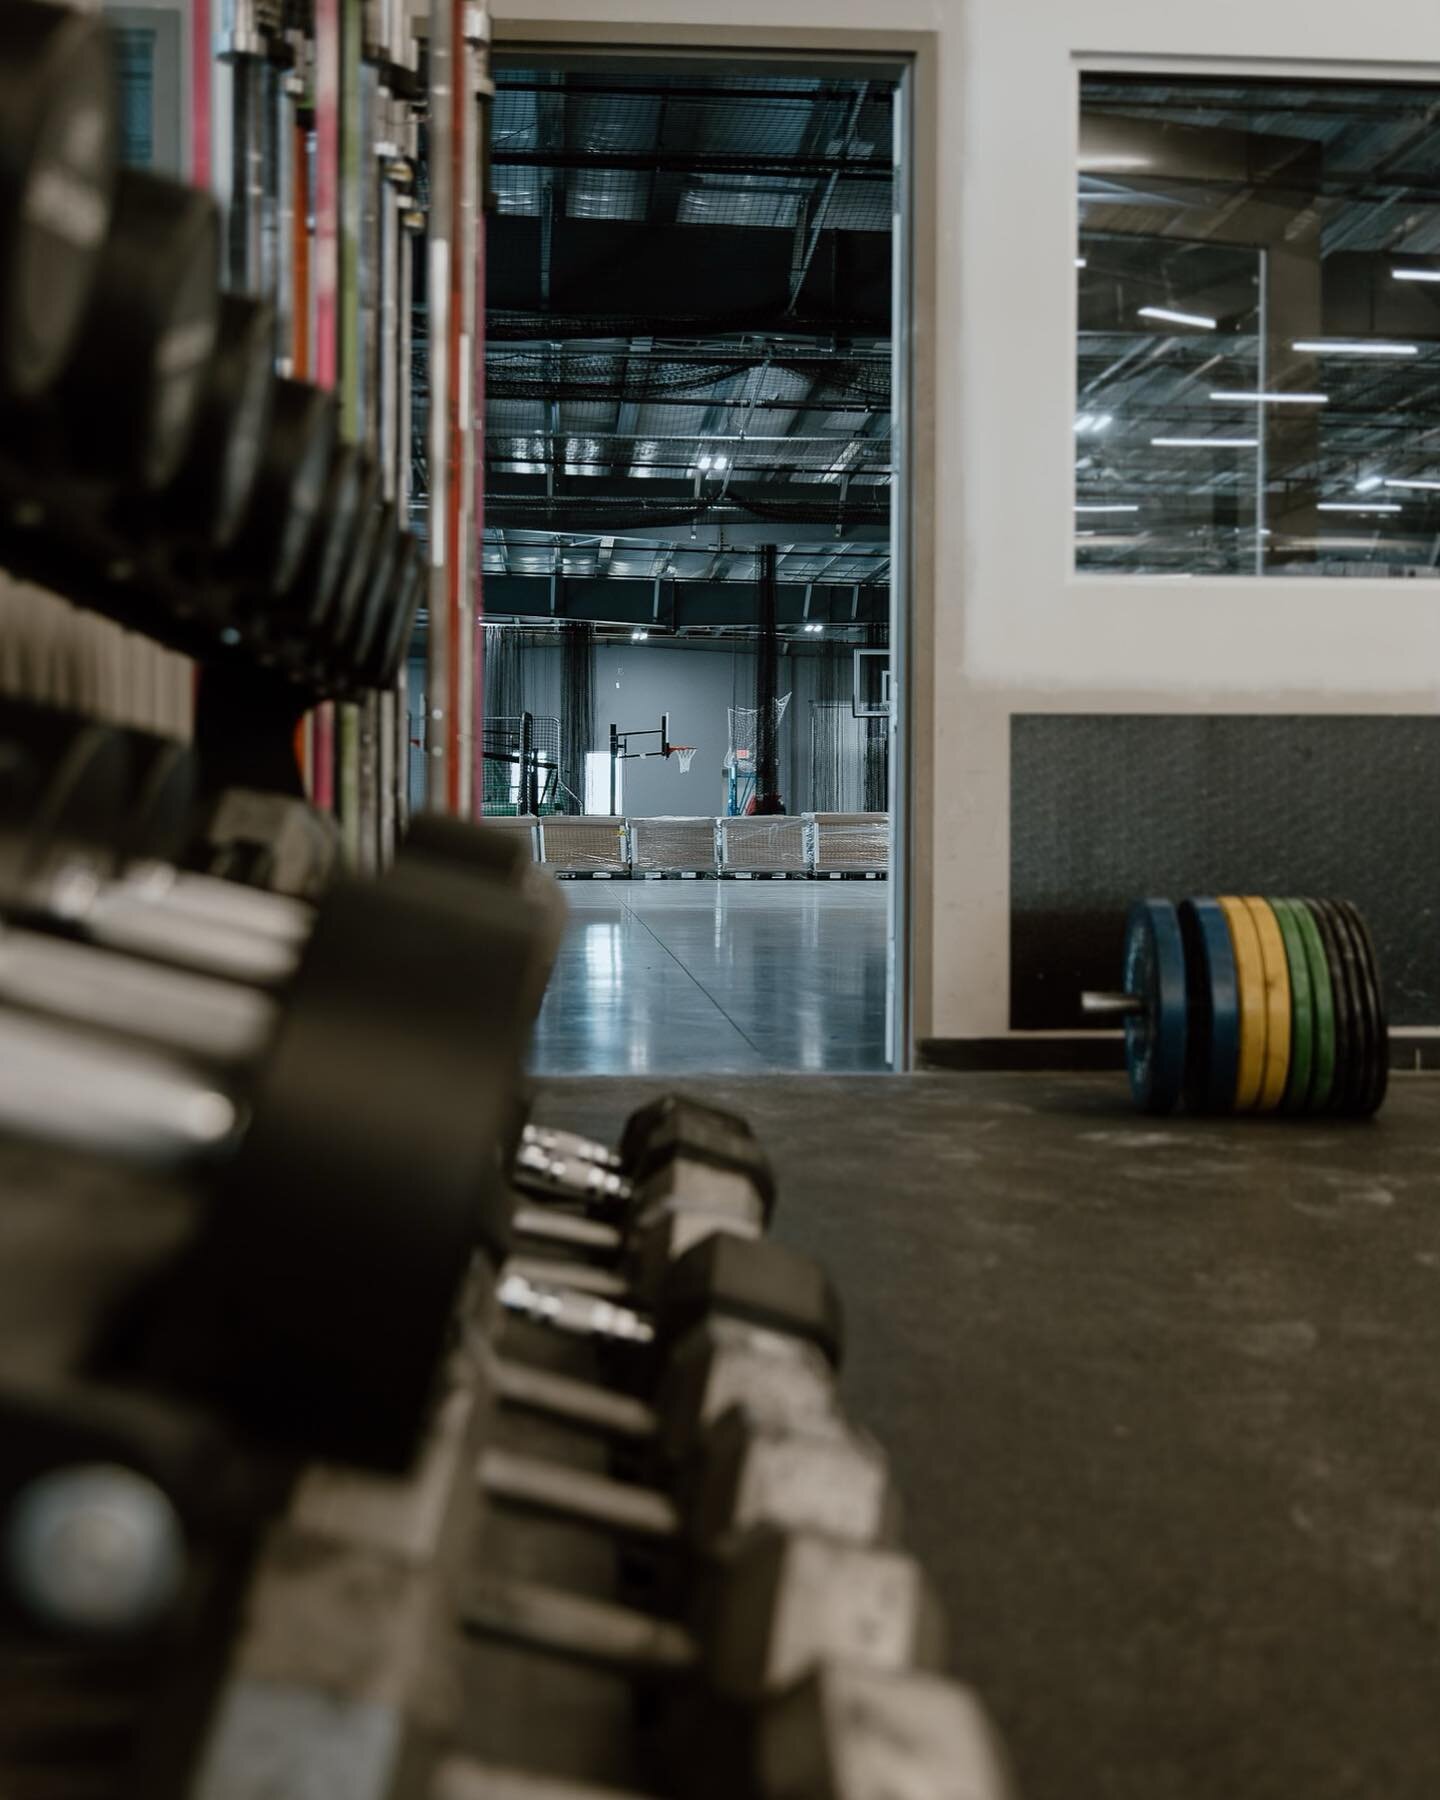 One Gym Sports is directly connected to @onegymelkhorn making it easy and convenient for parents to join a workout during their kids OG Sports practice session. 

One Gym offers classes for kids, athletes and adults. 

Our classes include &hellip;
OG